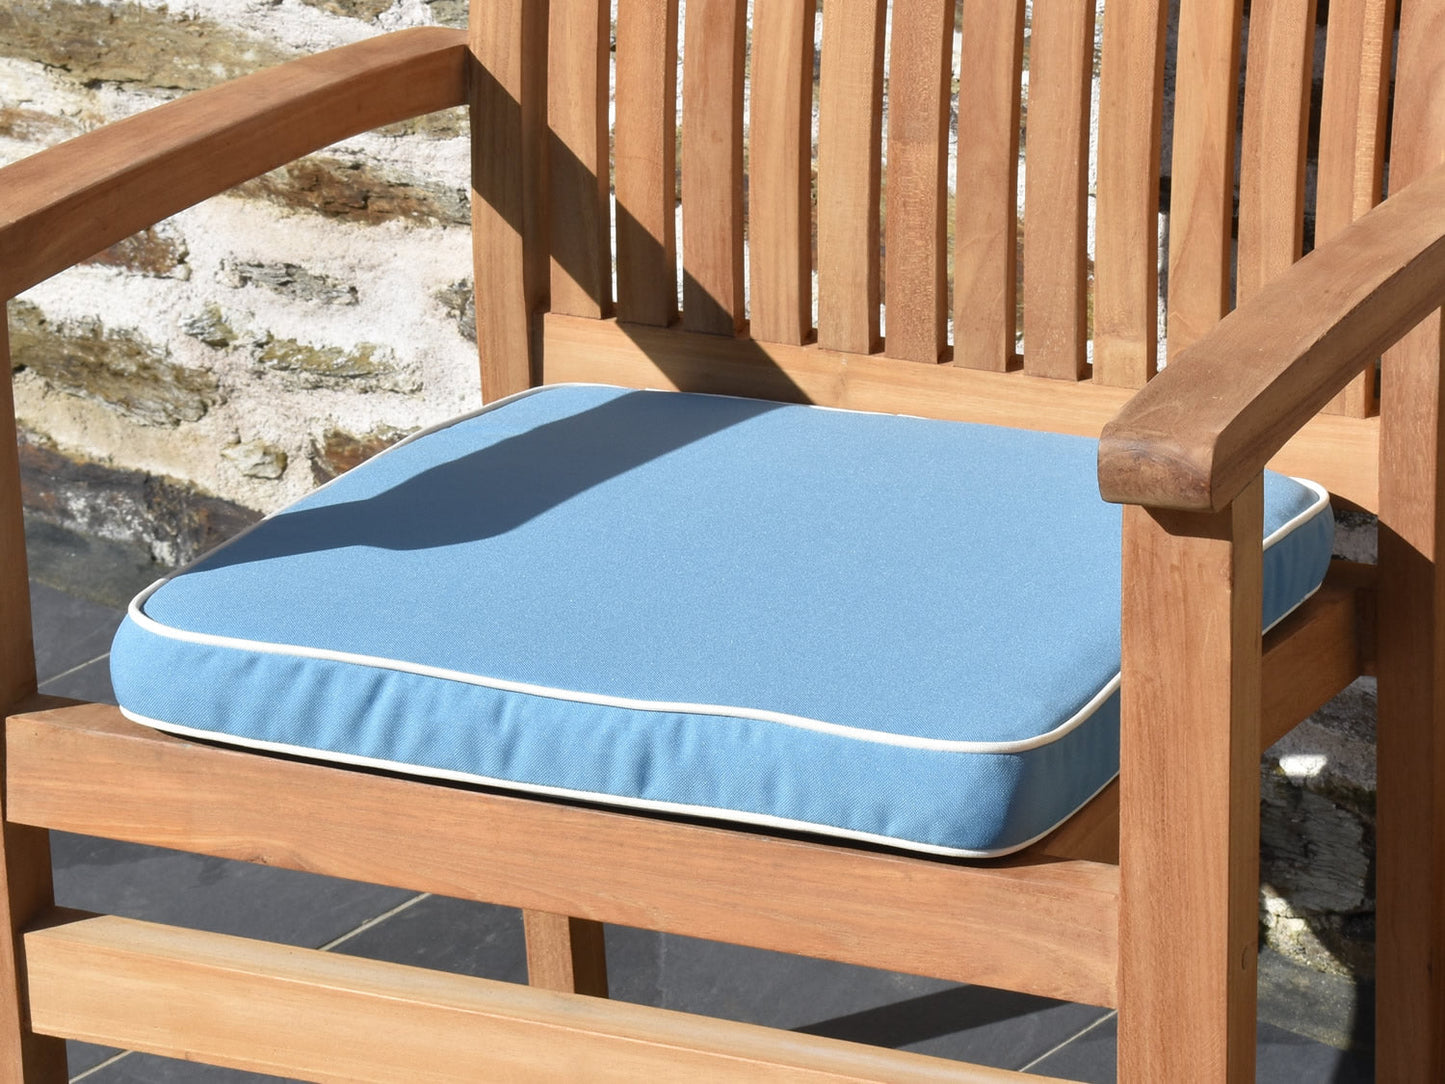 Luxury large outdoor garden seat pad, Light Blue with White piping, close view